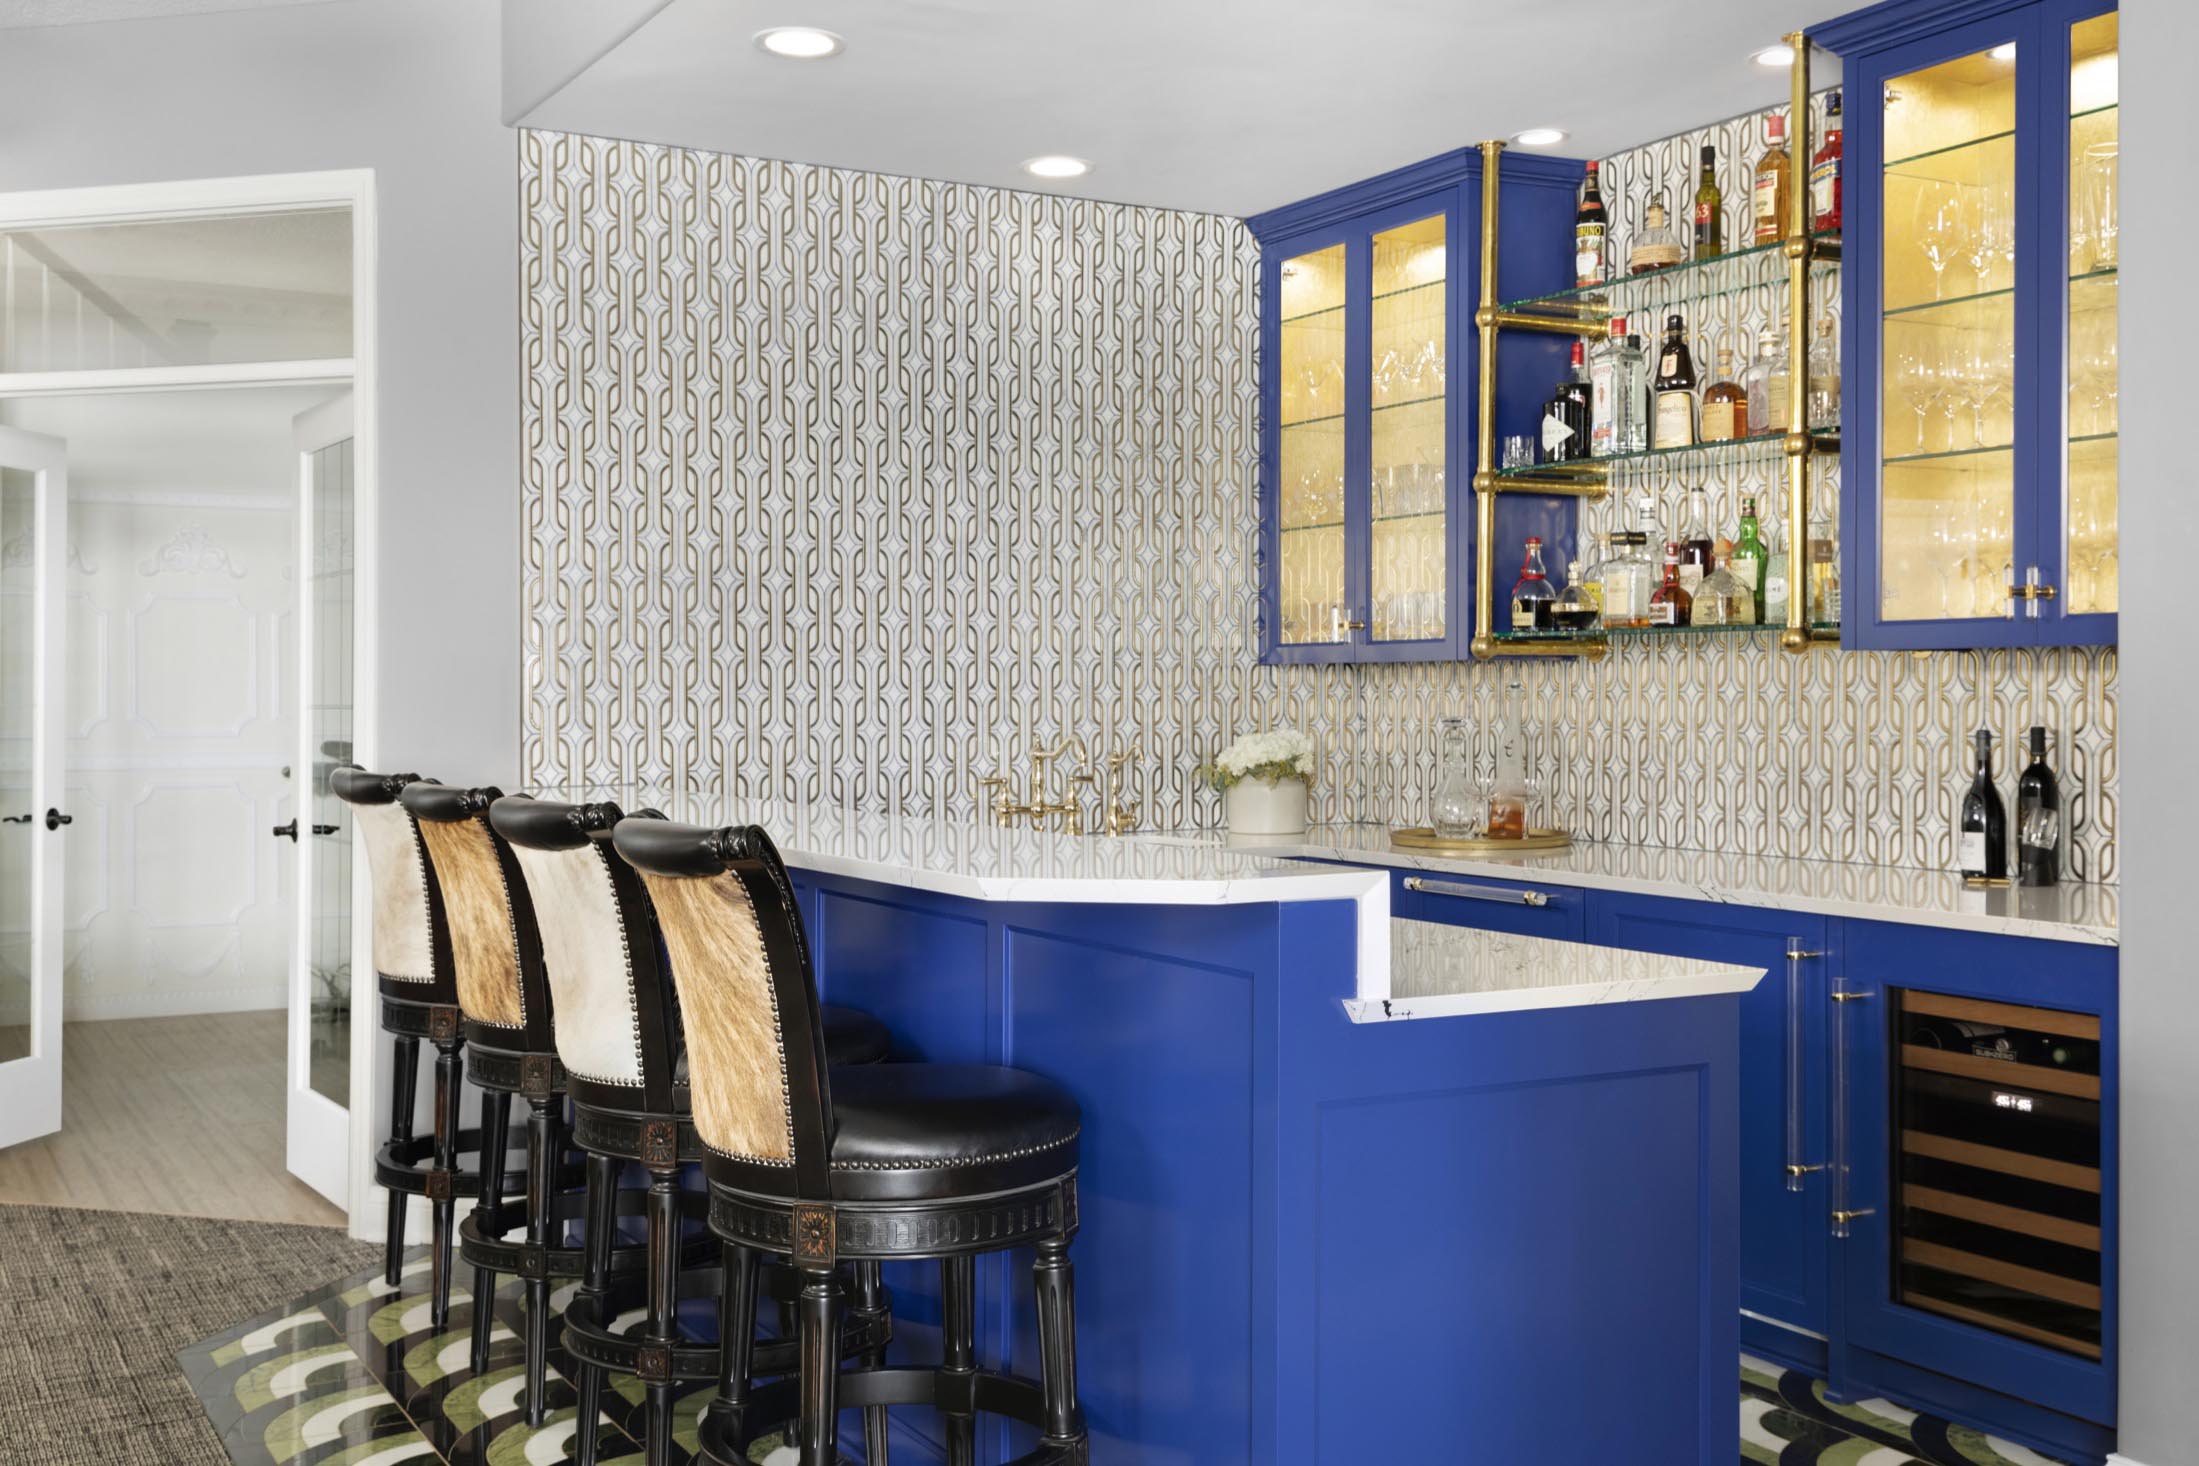 Basement bar with blue cabinetry